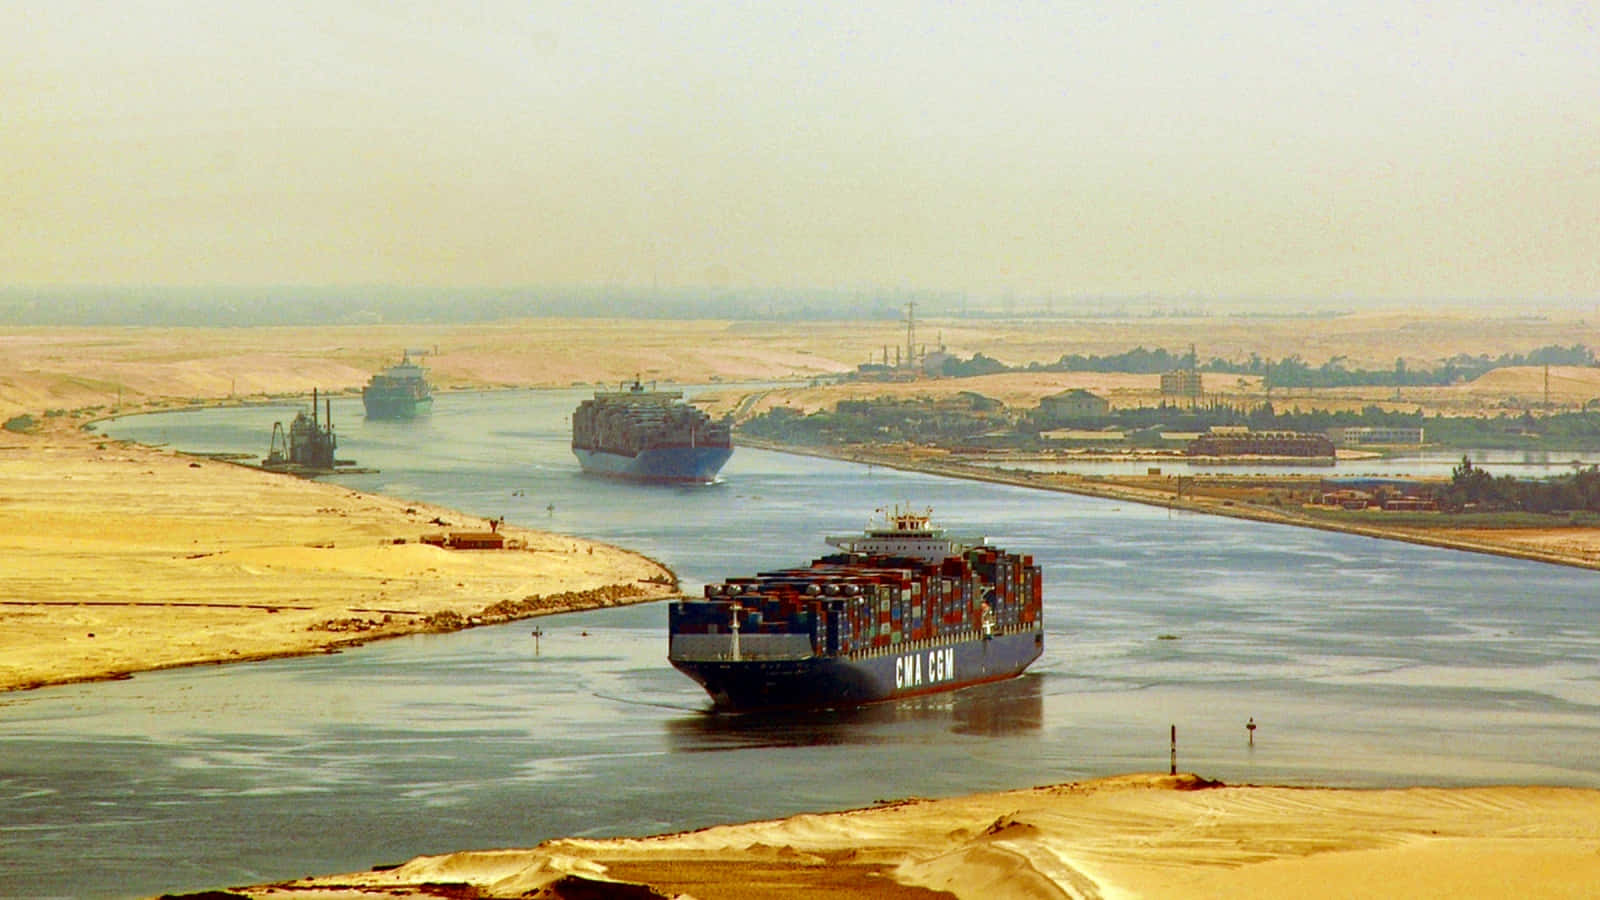 View of Suez Canal in Egypt